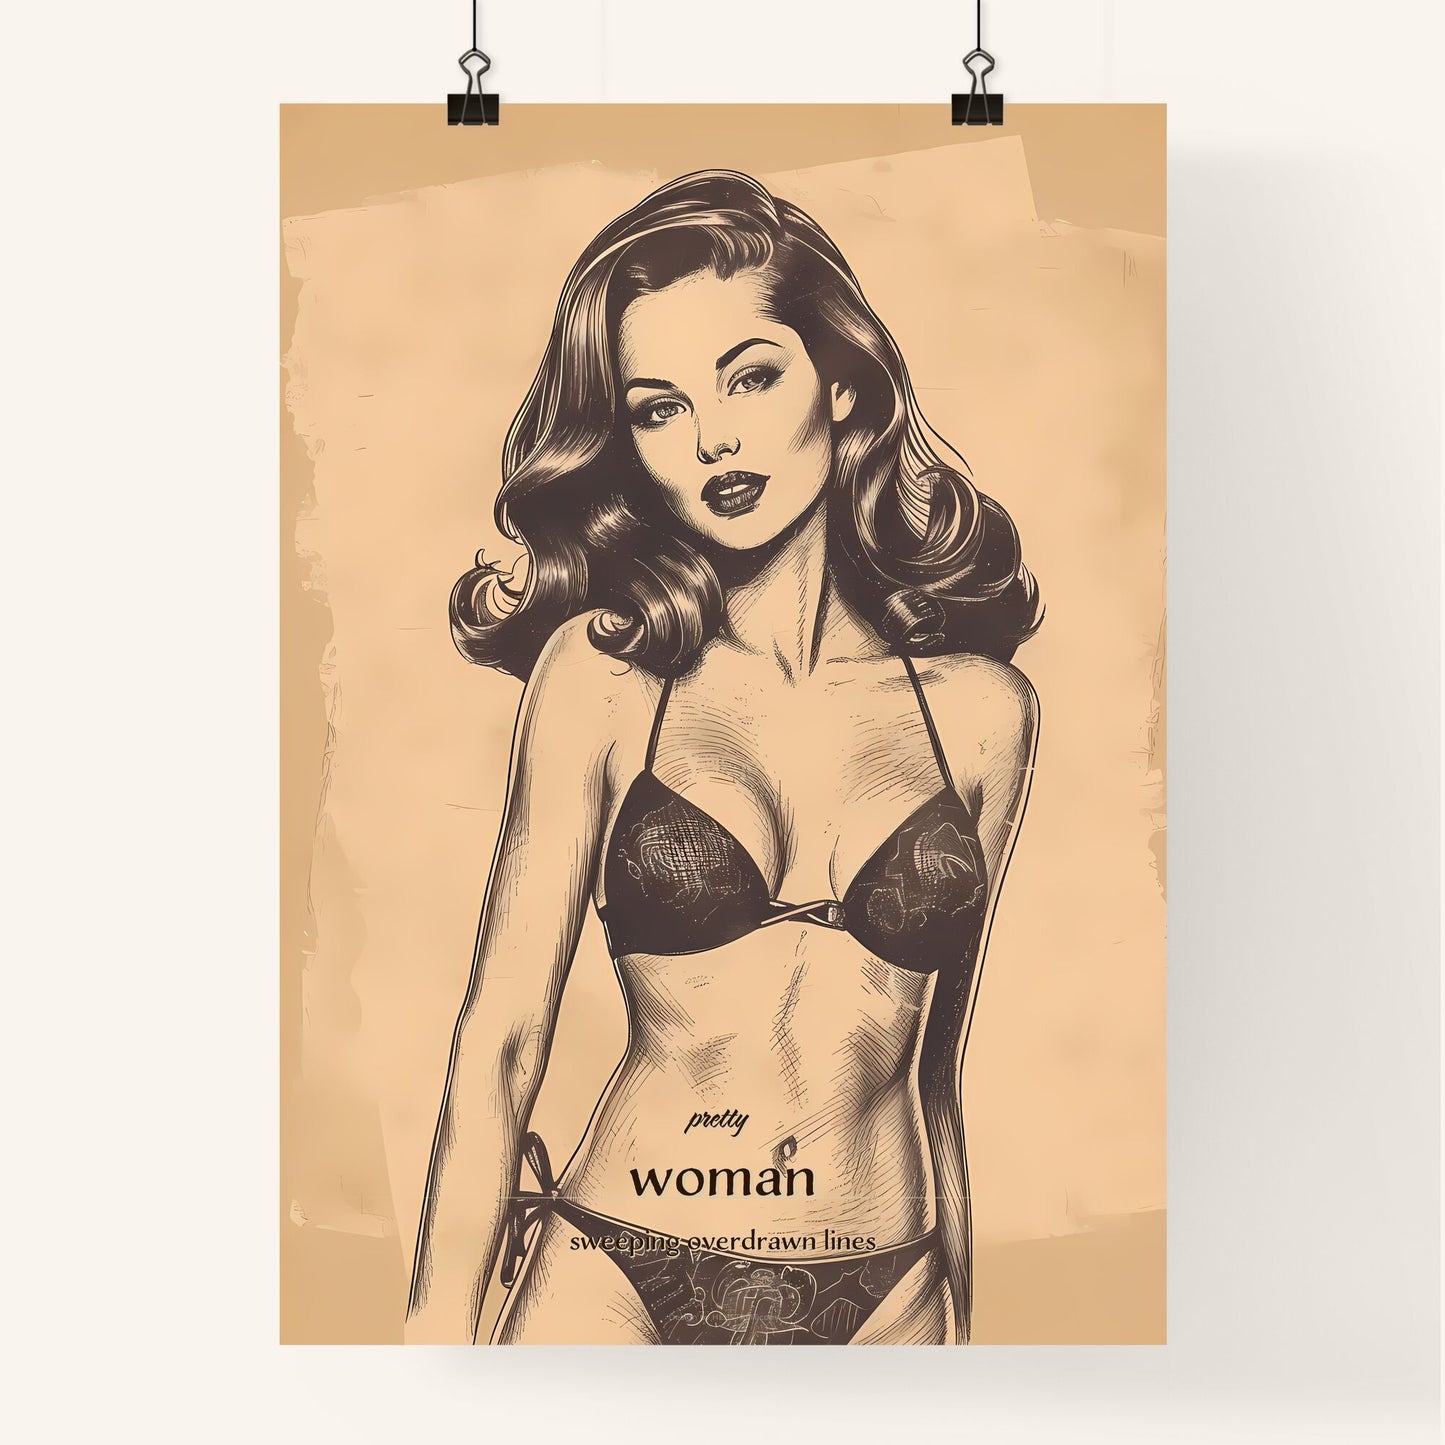 pretty, woman, sweeping overdrawn lines, A Poster of a woman in a garment Default Title